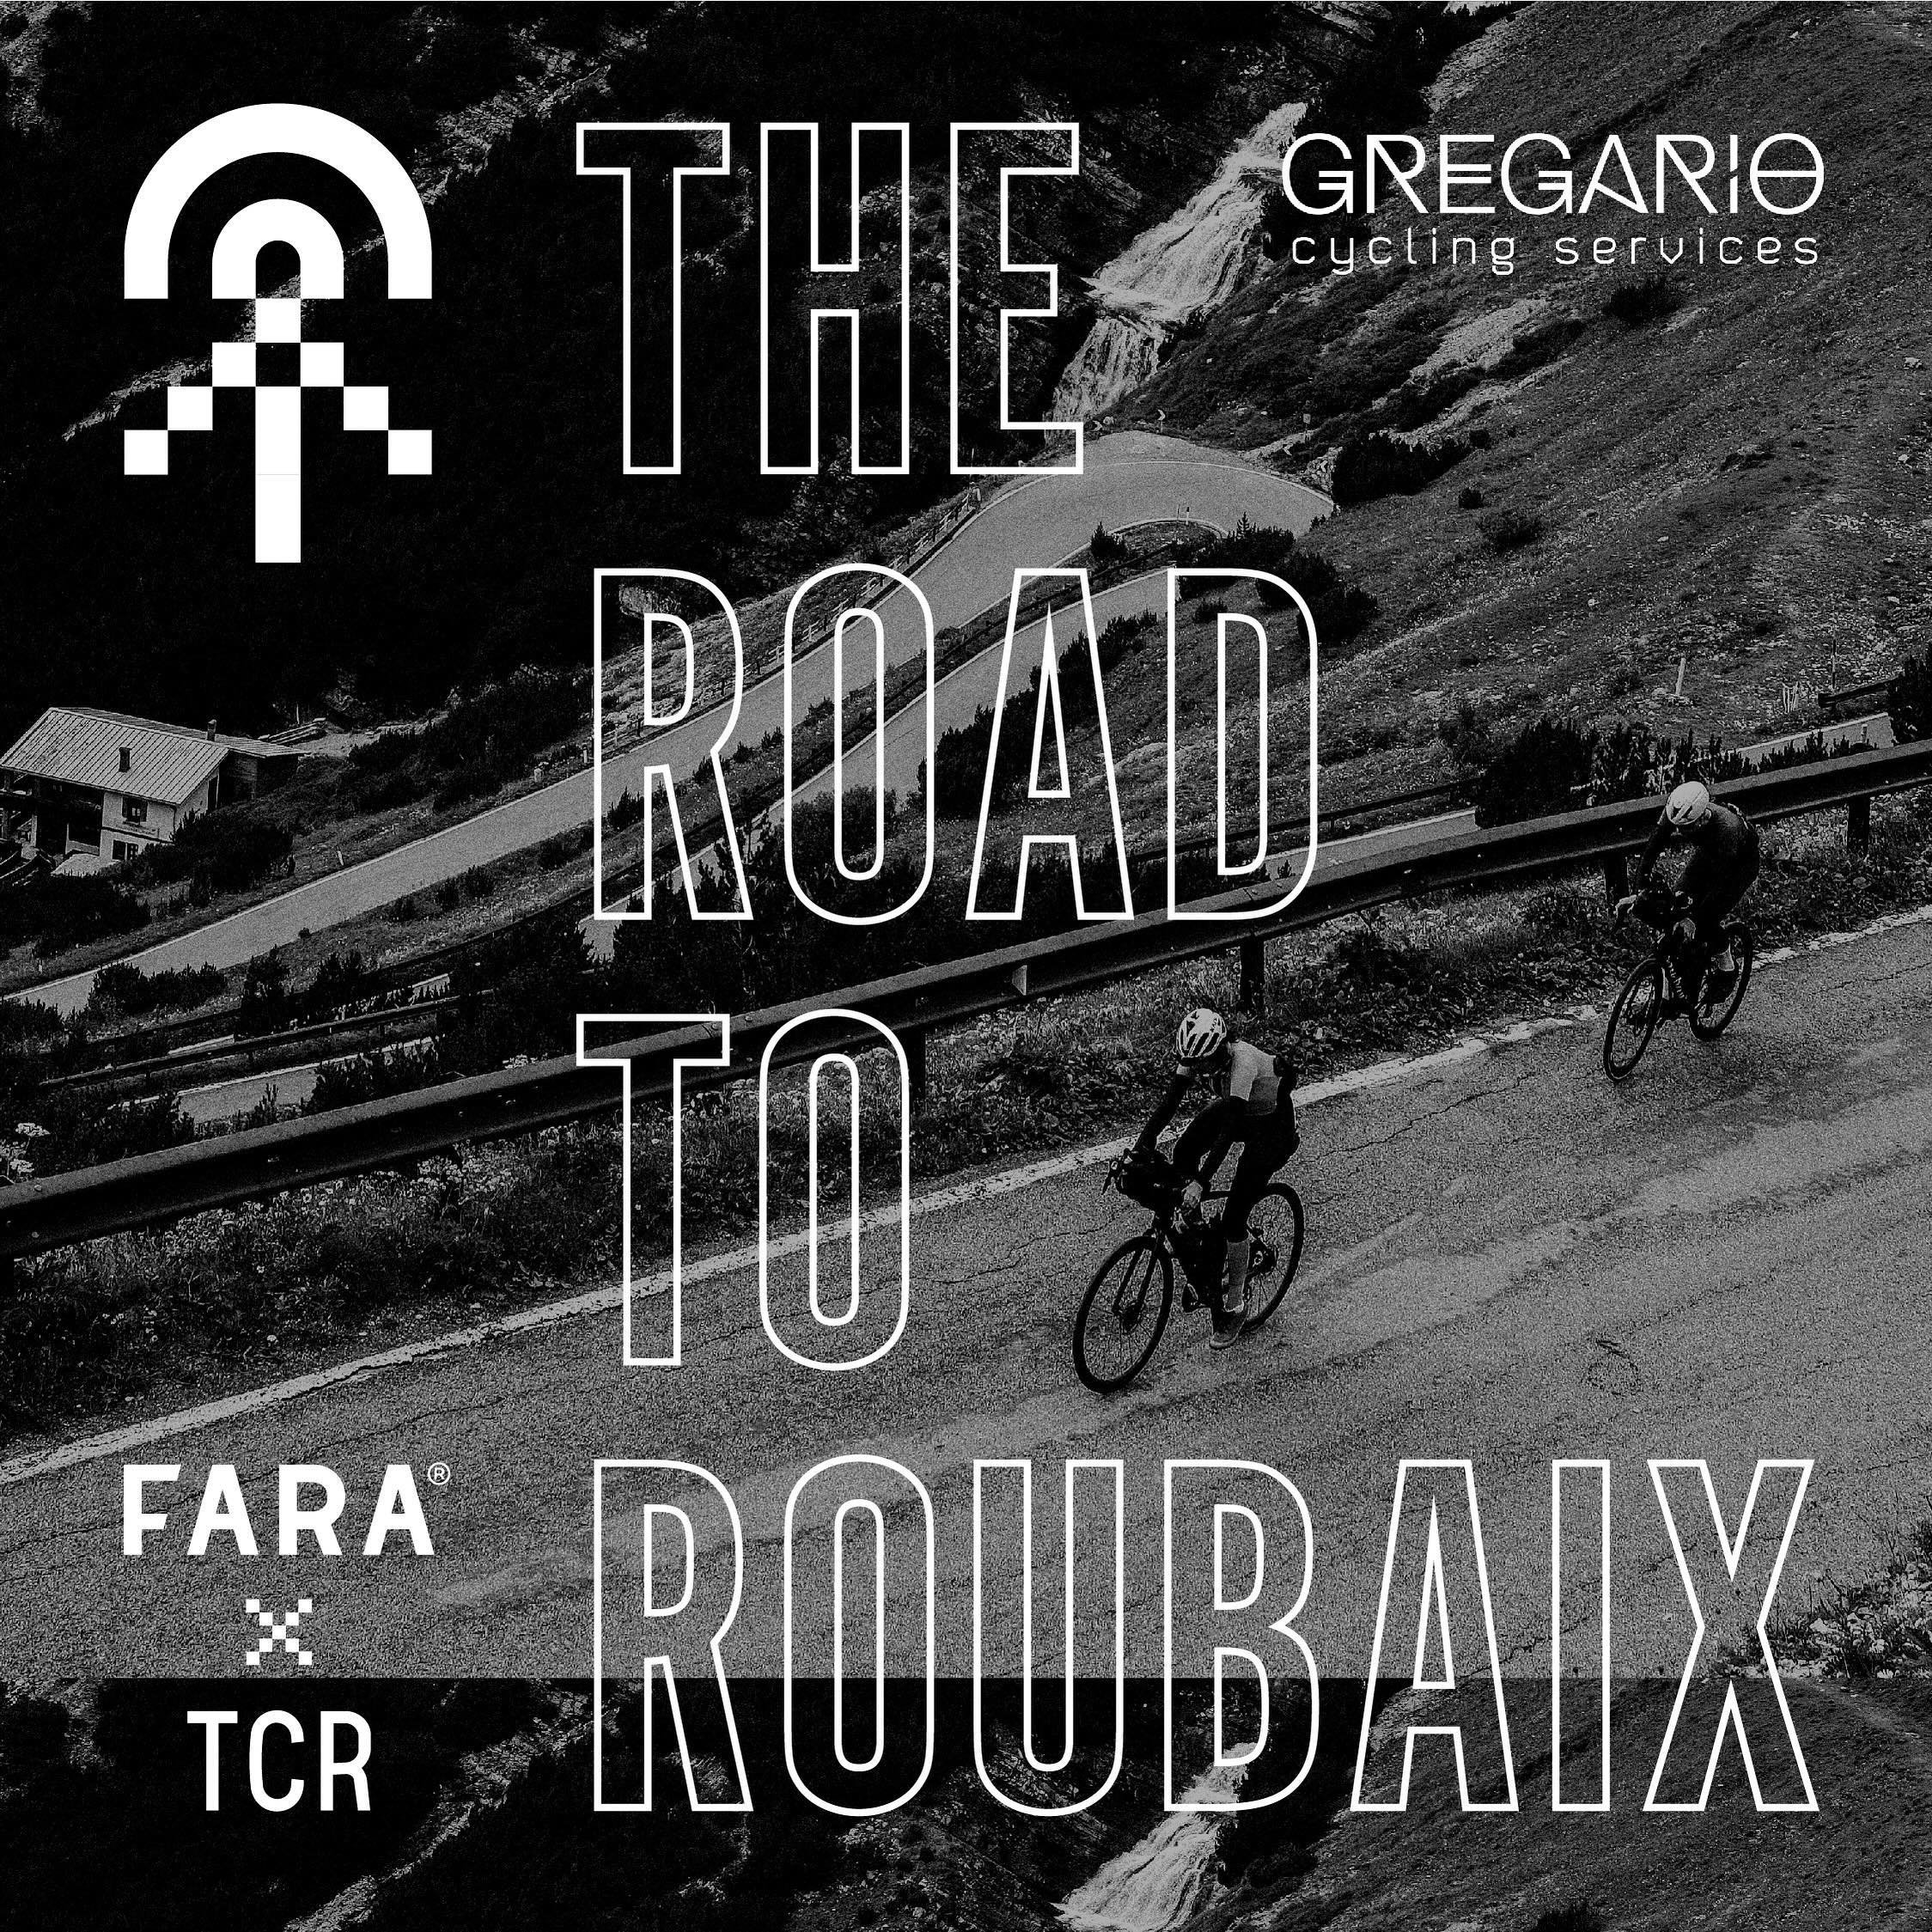 Join us for the next instalment of our Road to Roubaix series!

We&rsquo;re working with @faracycling and @thetranscontinental to bring you a series of talks and rides in the lead up to the TCR in July. These are a great opportunity to get yourself a